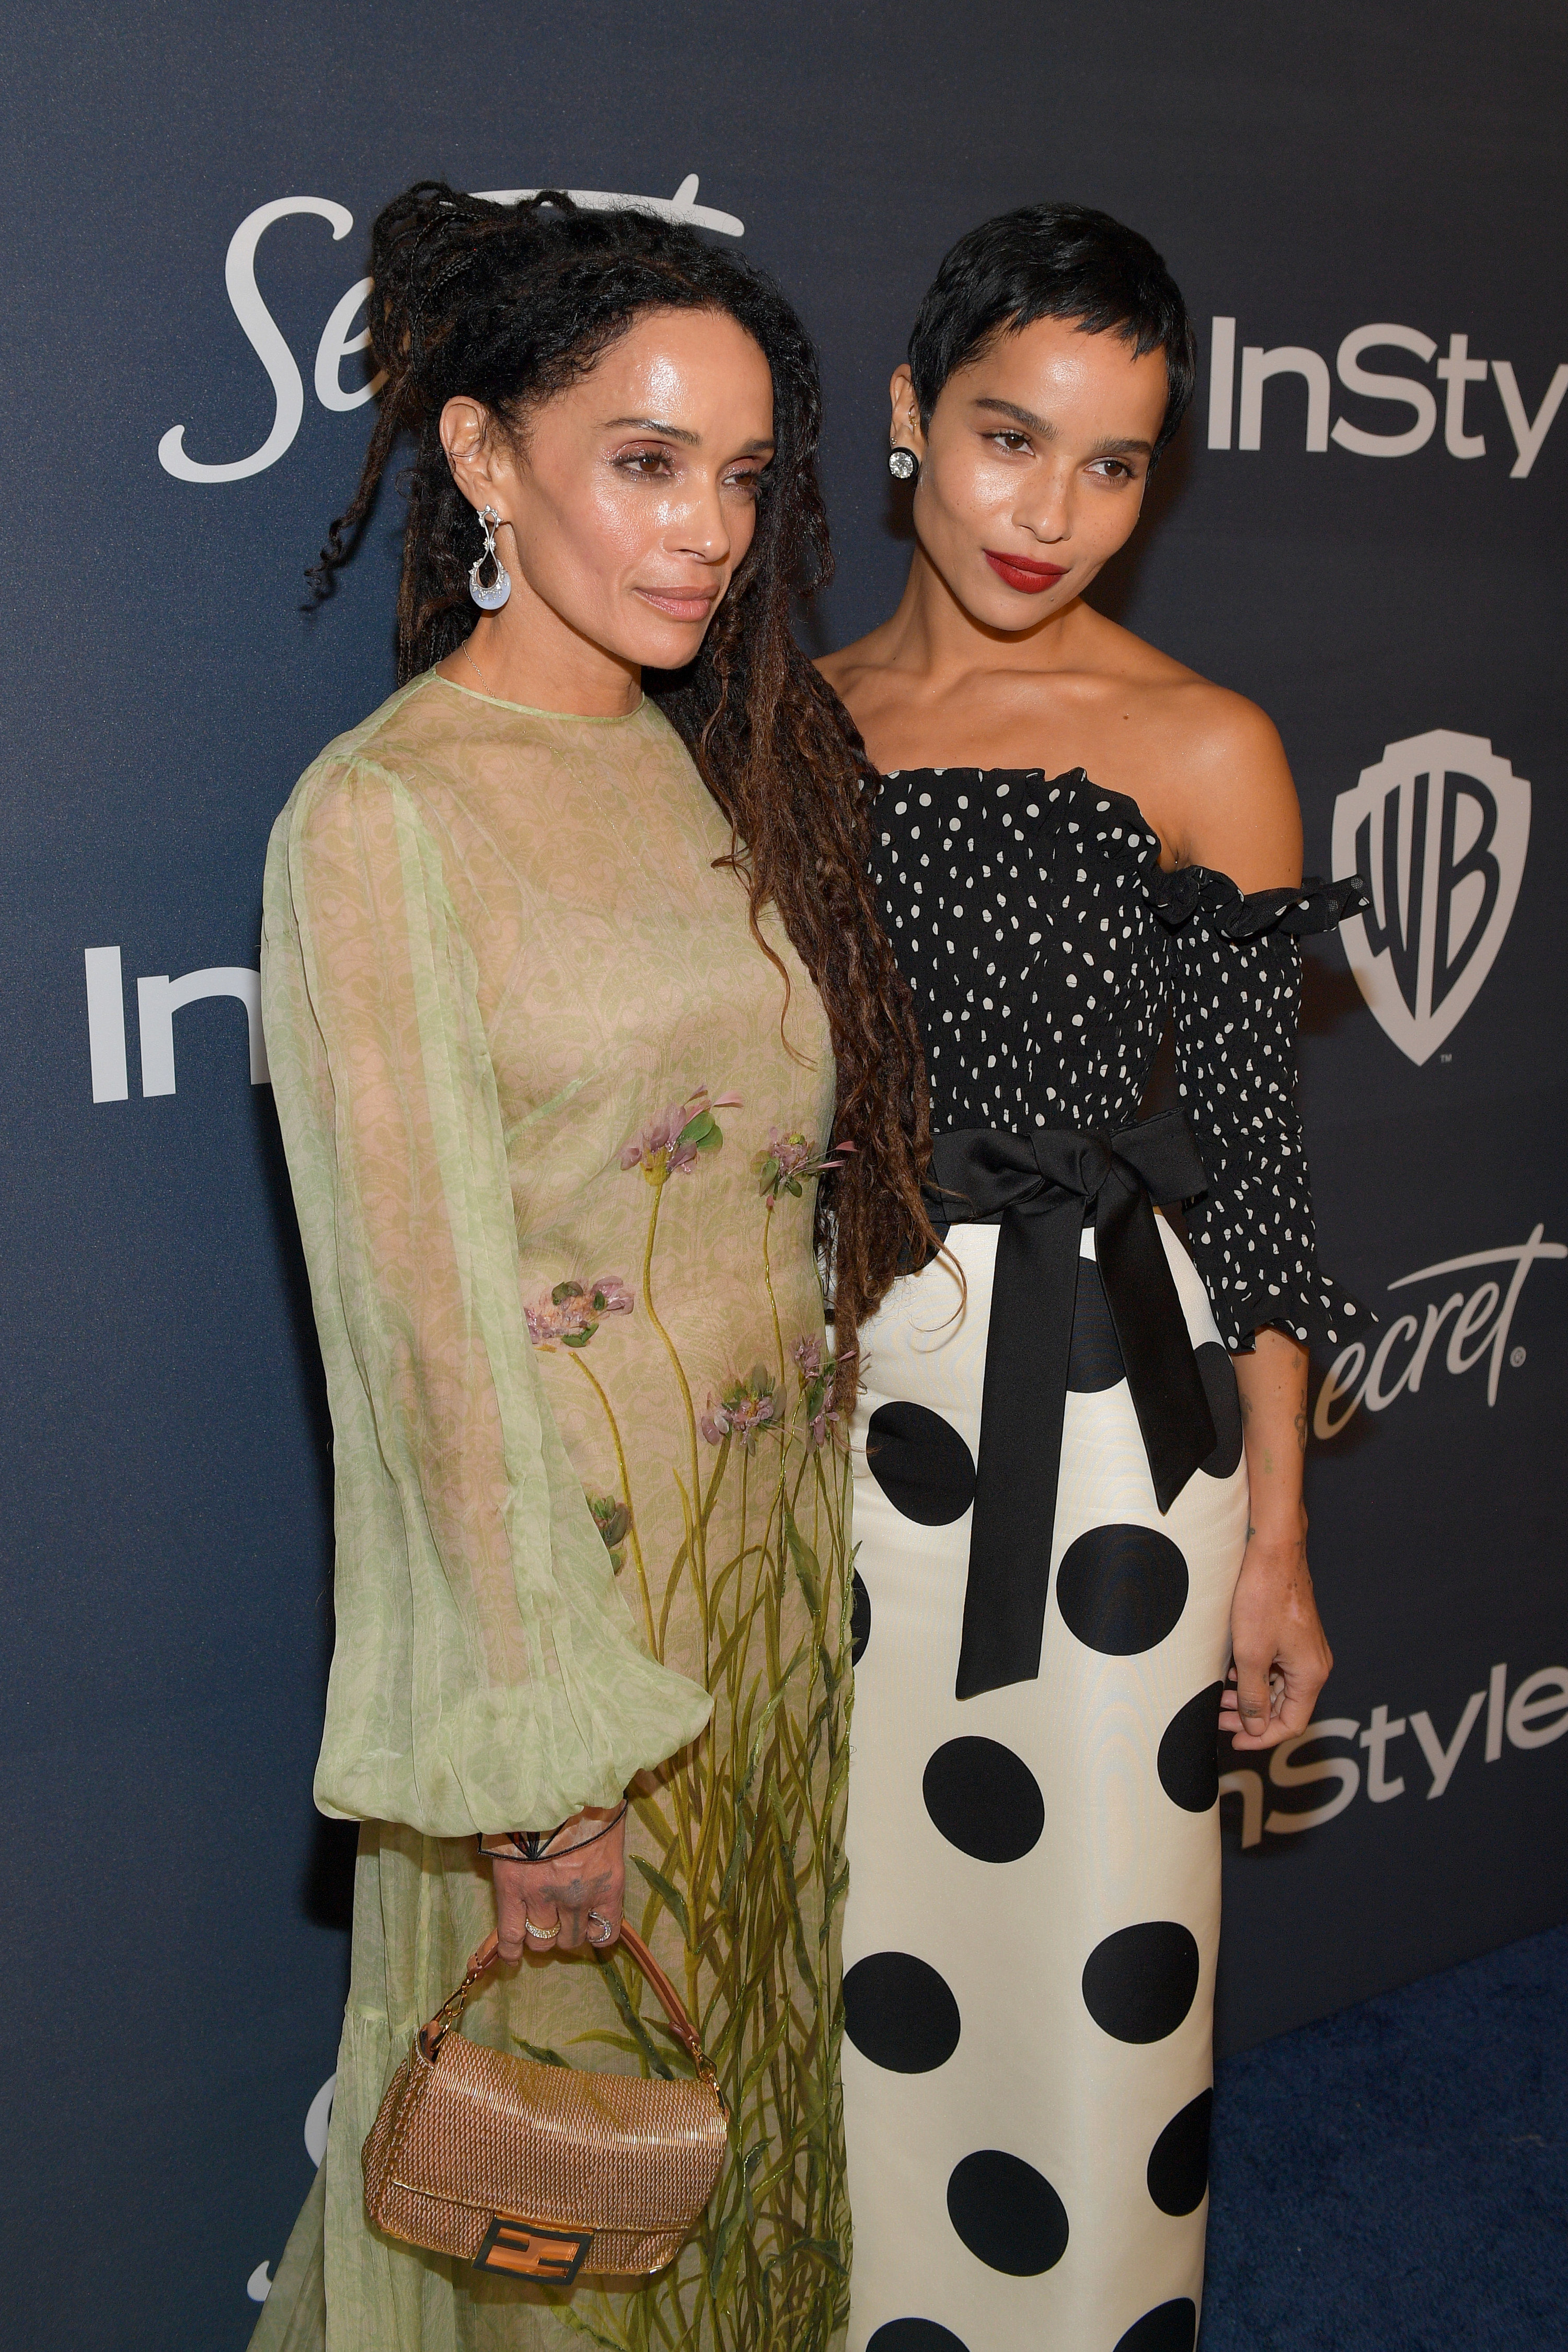 Lisa Bonet and Zoë Kravitz pose together at The InStyle And Warner Bros. 77th Annual Golden Globe Awards Post-Party in January 2020